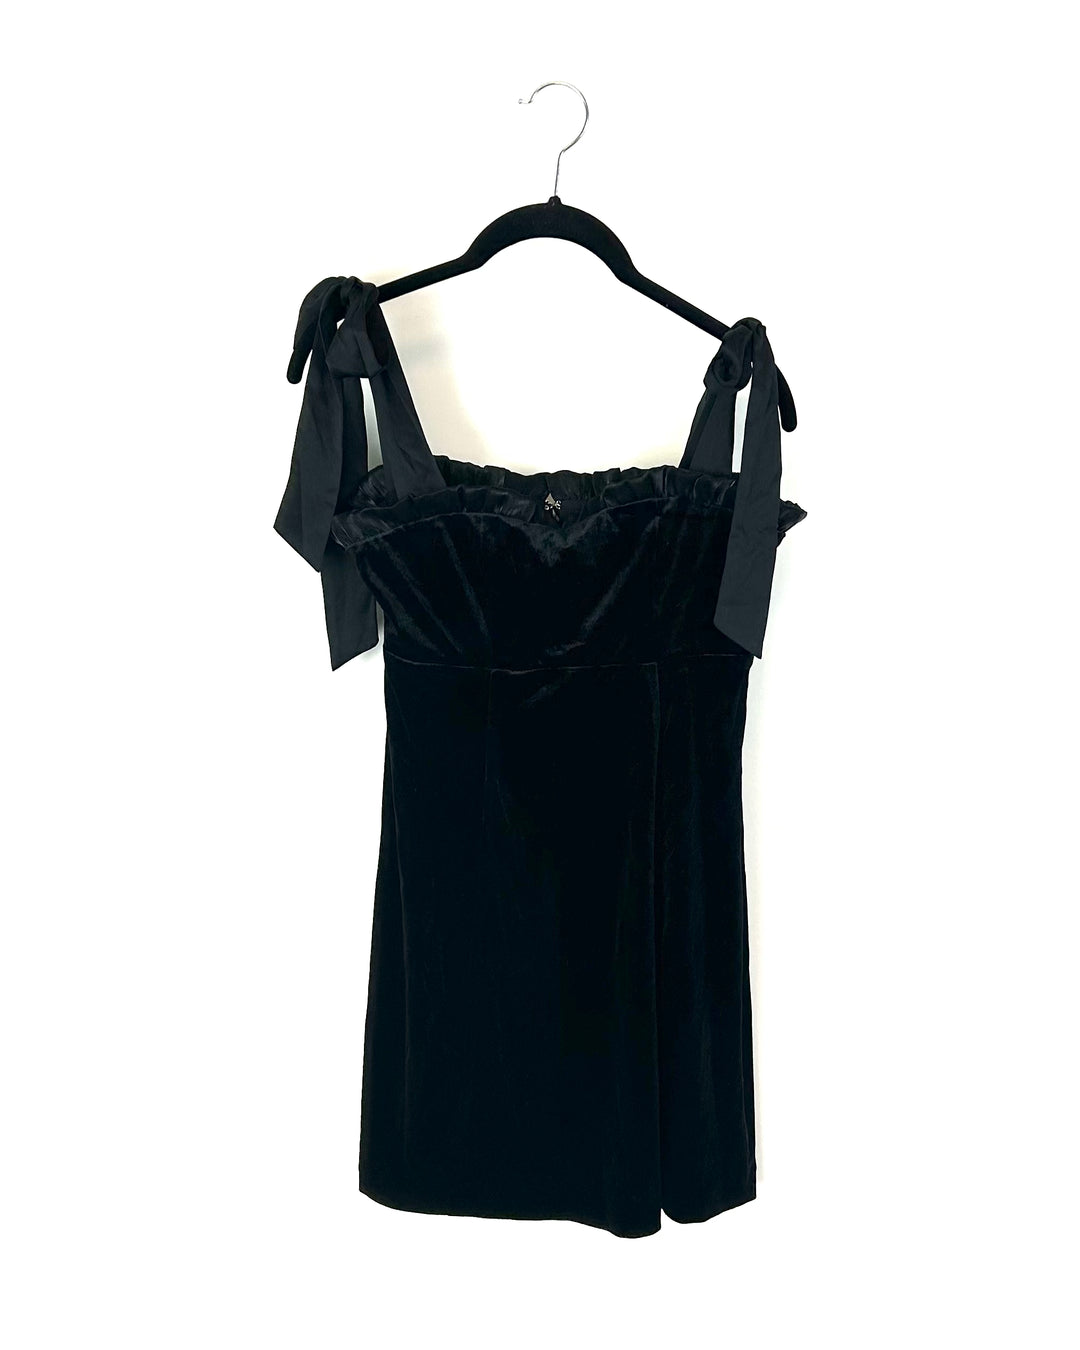 Black Velour Dress - Extra Small, Small, Large